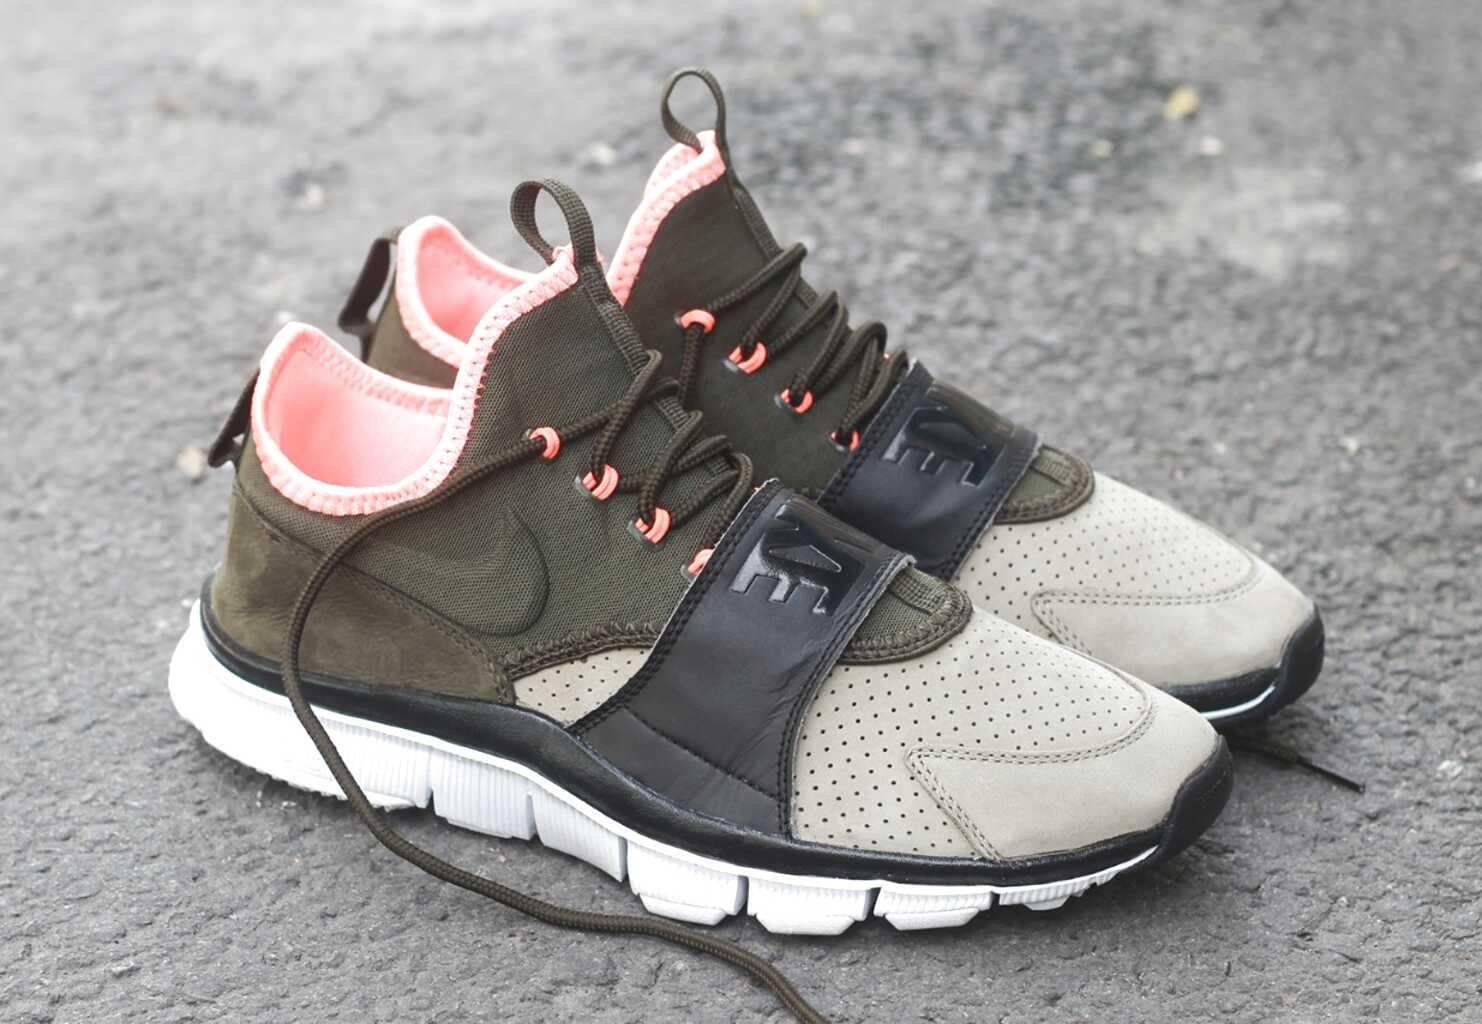 Nike Huarache 5 5 for sale in UK | View 77 bargains